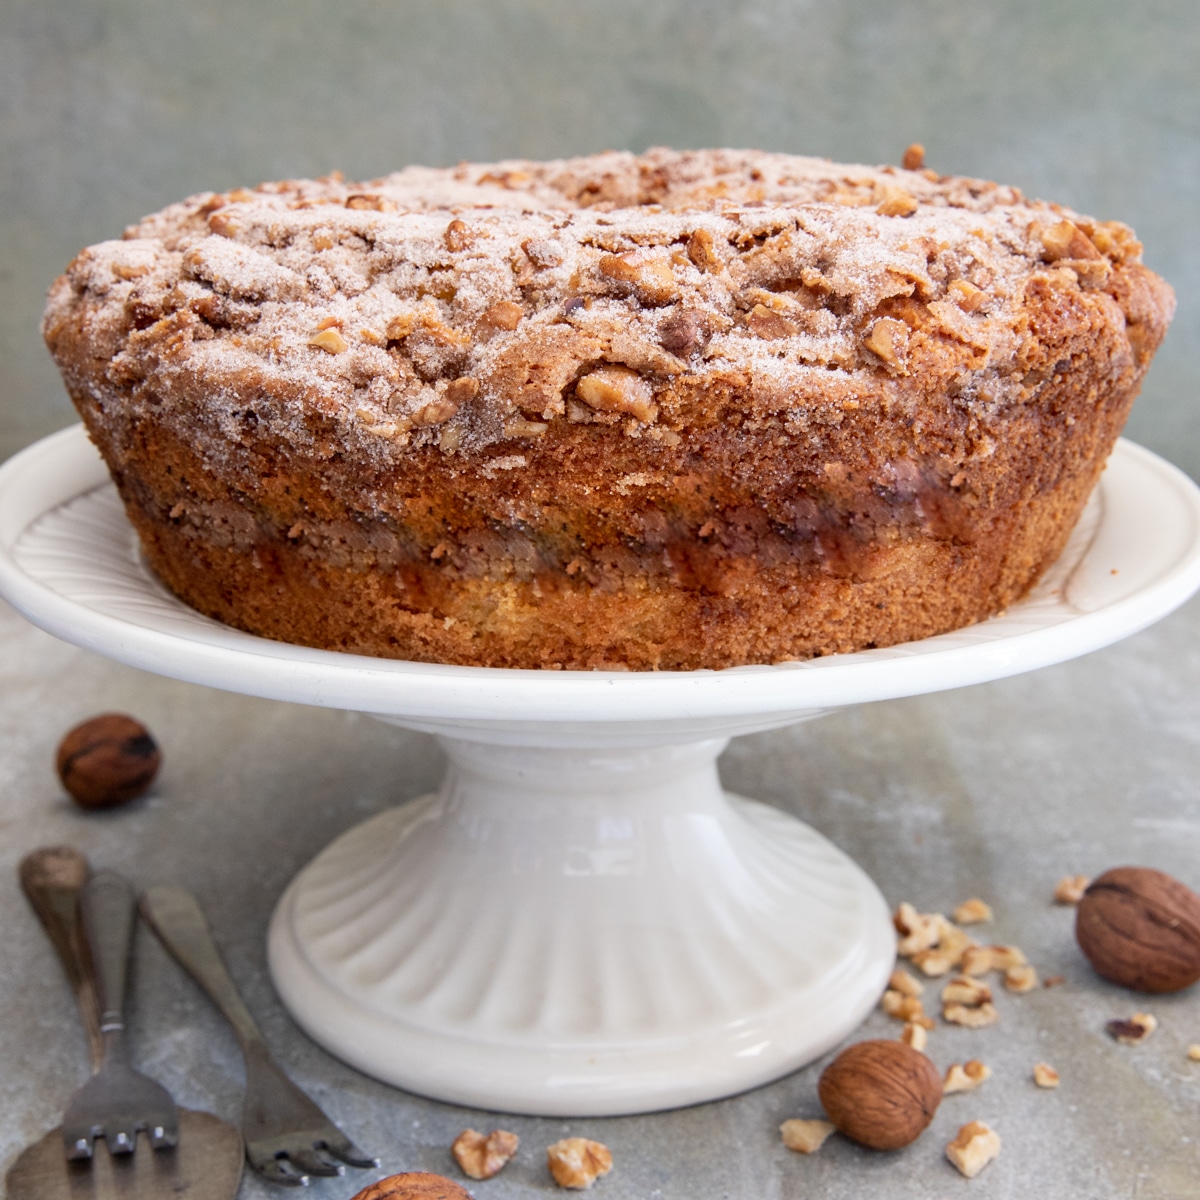 The Nutty Bubbles Cake is a tangy, creamy delight loaded with nuts and  choco-nuts! The